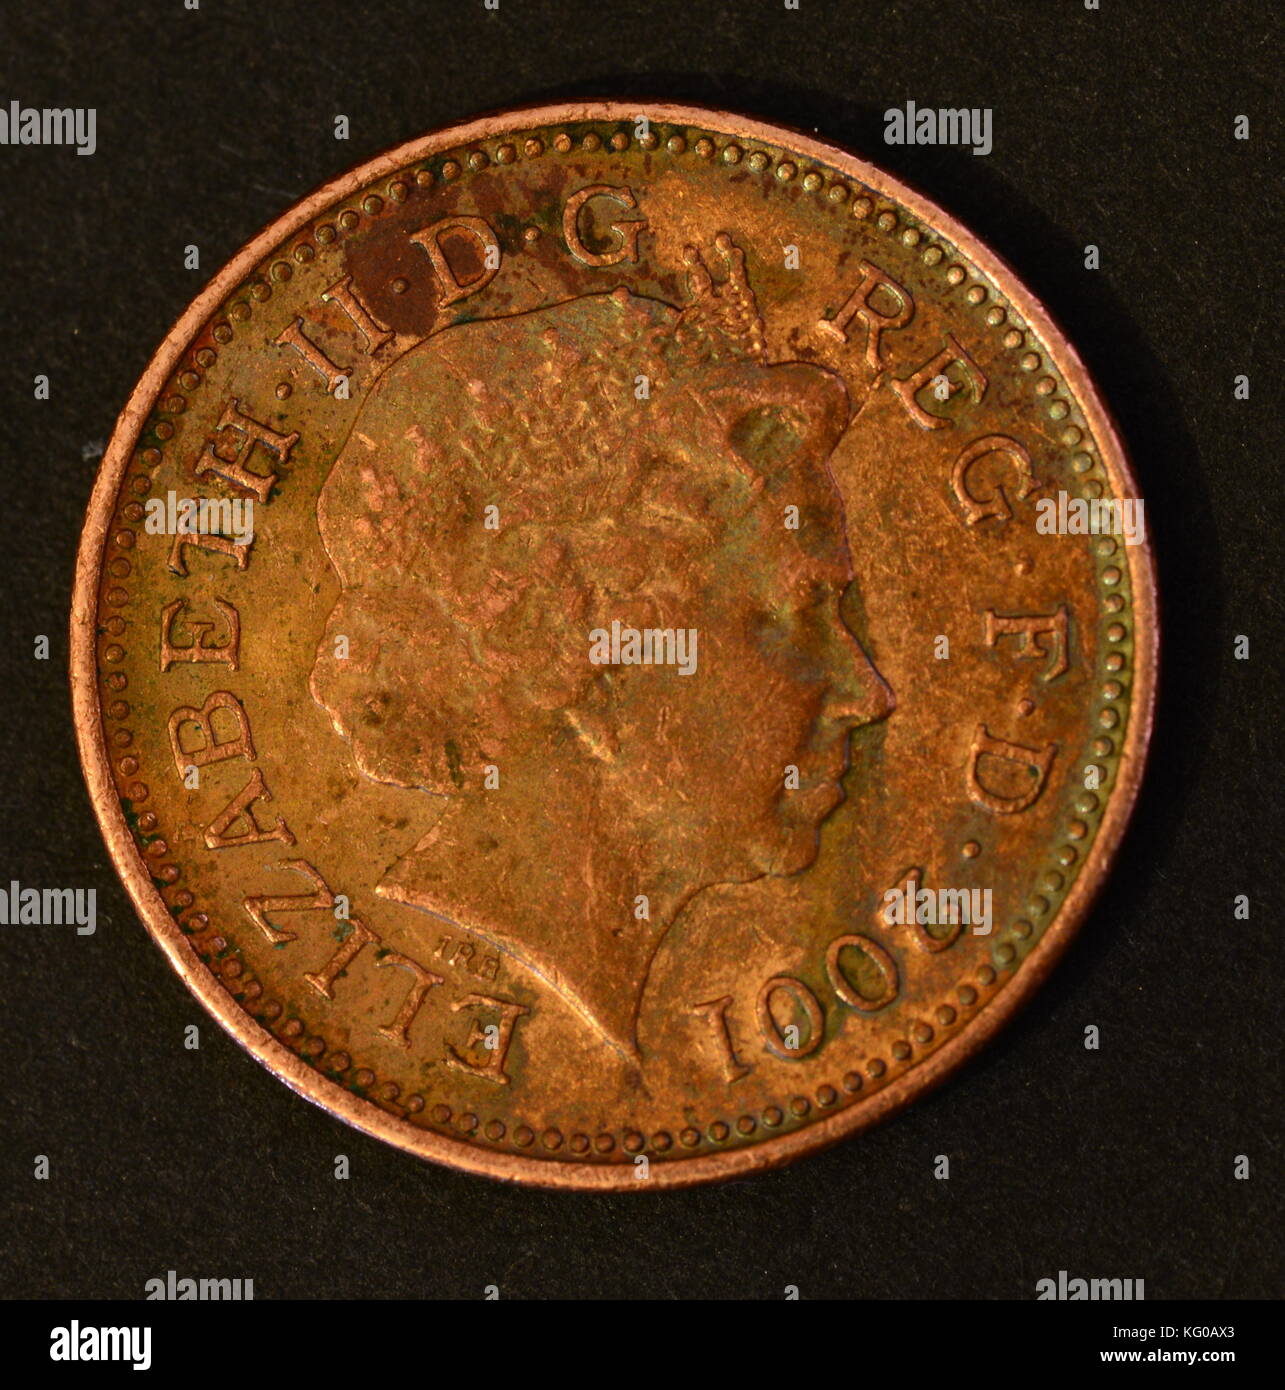 One Pence coin Stock Photo